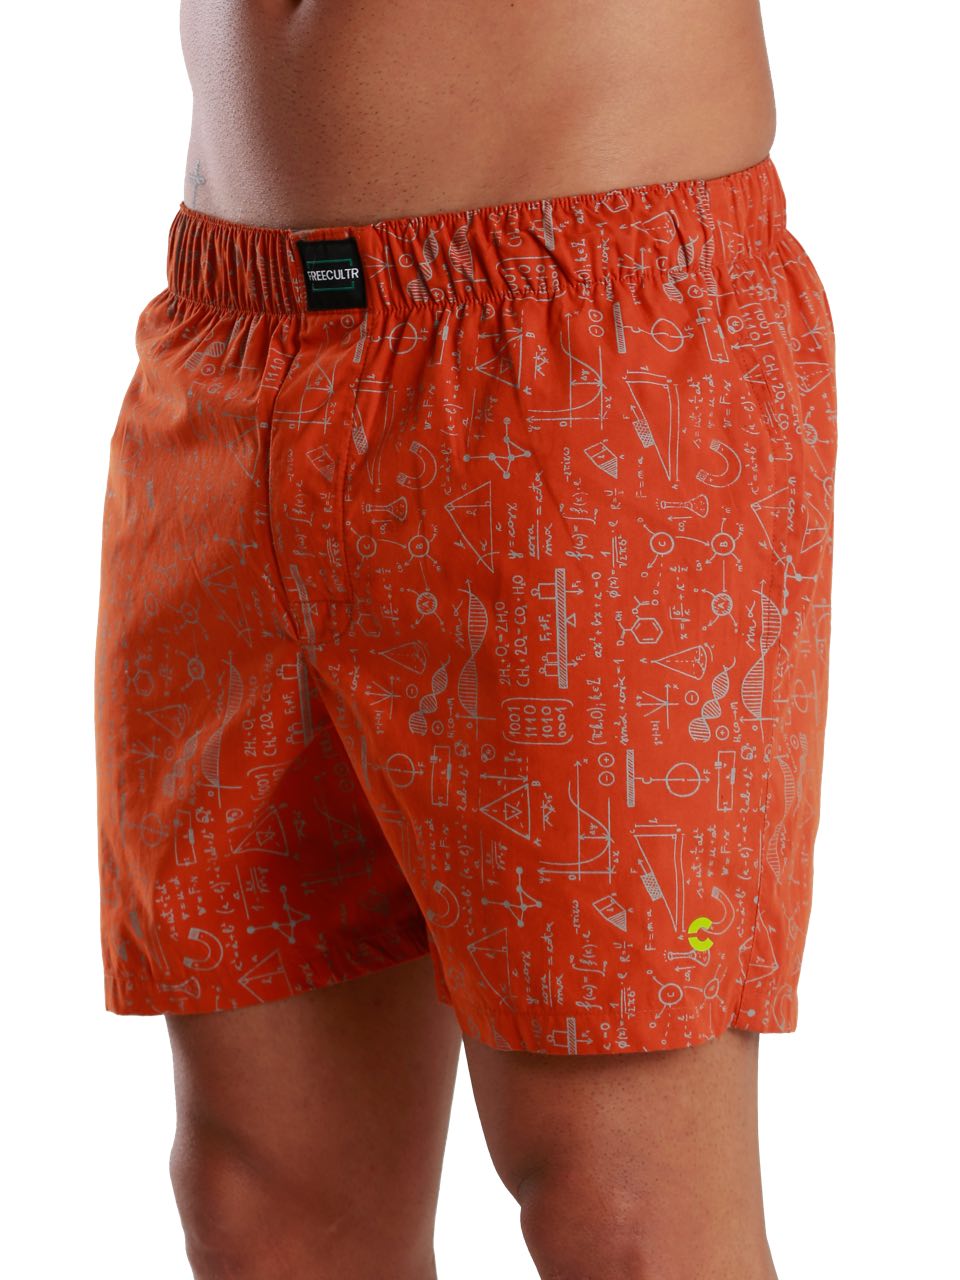 All-Day Printed Boxer Shorts (Pack Of 1)